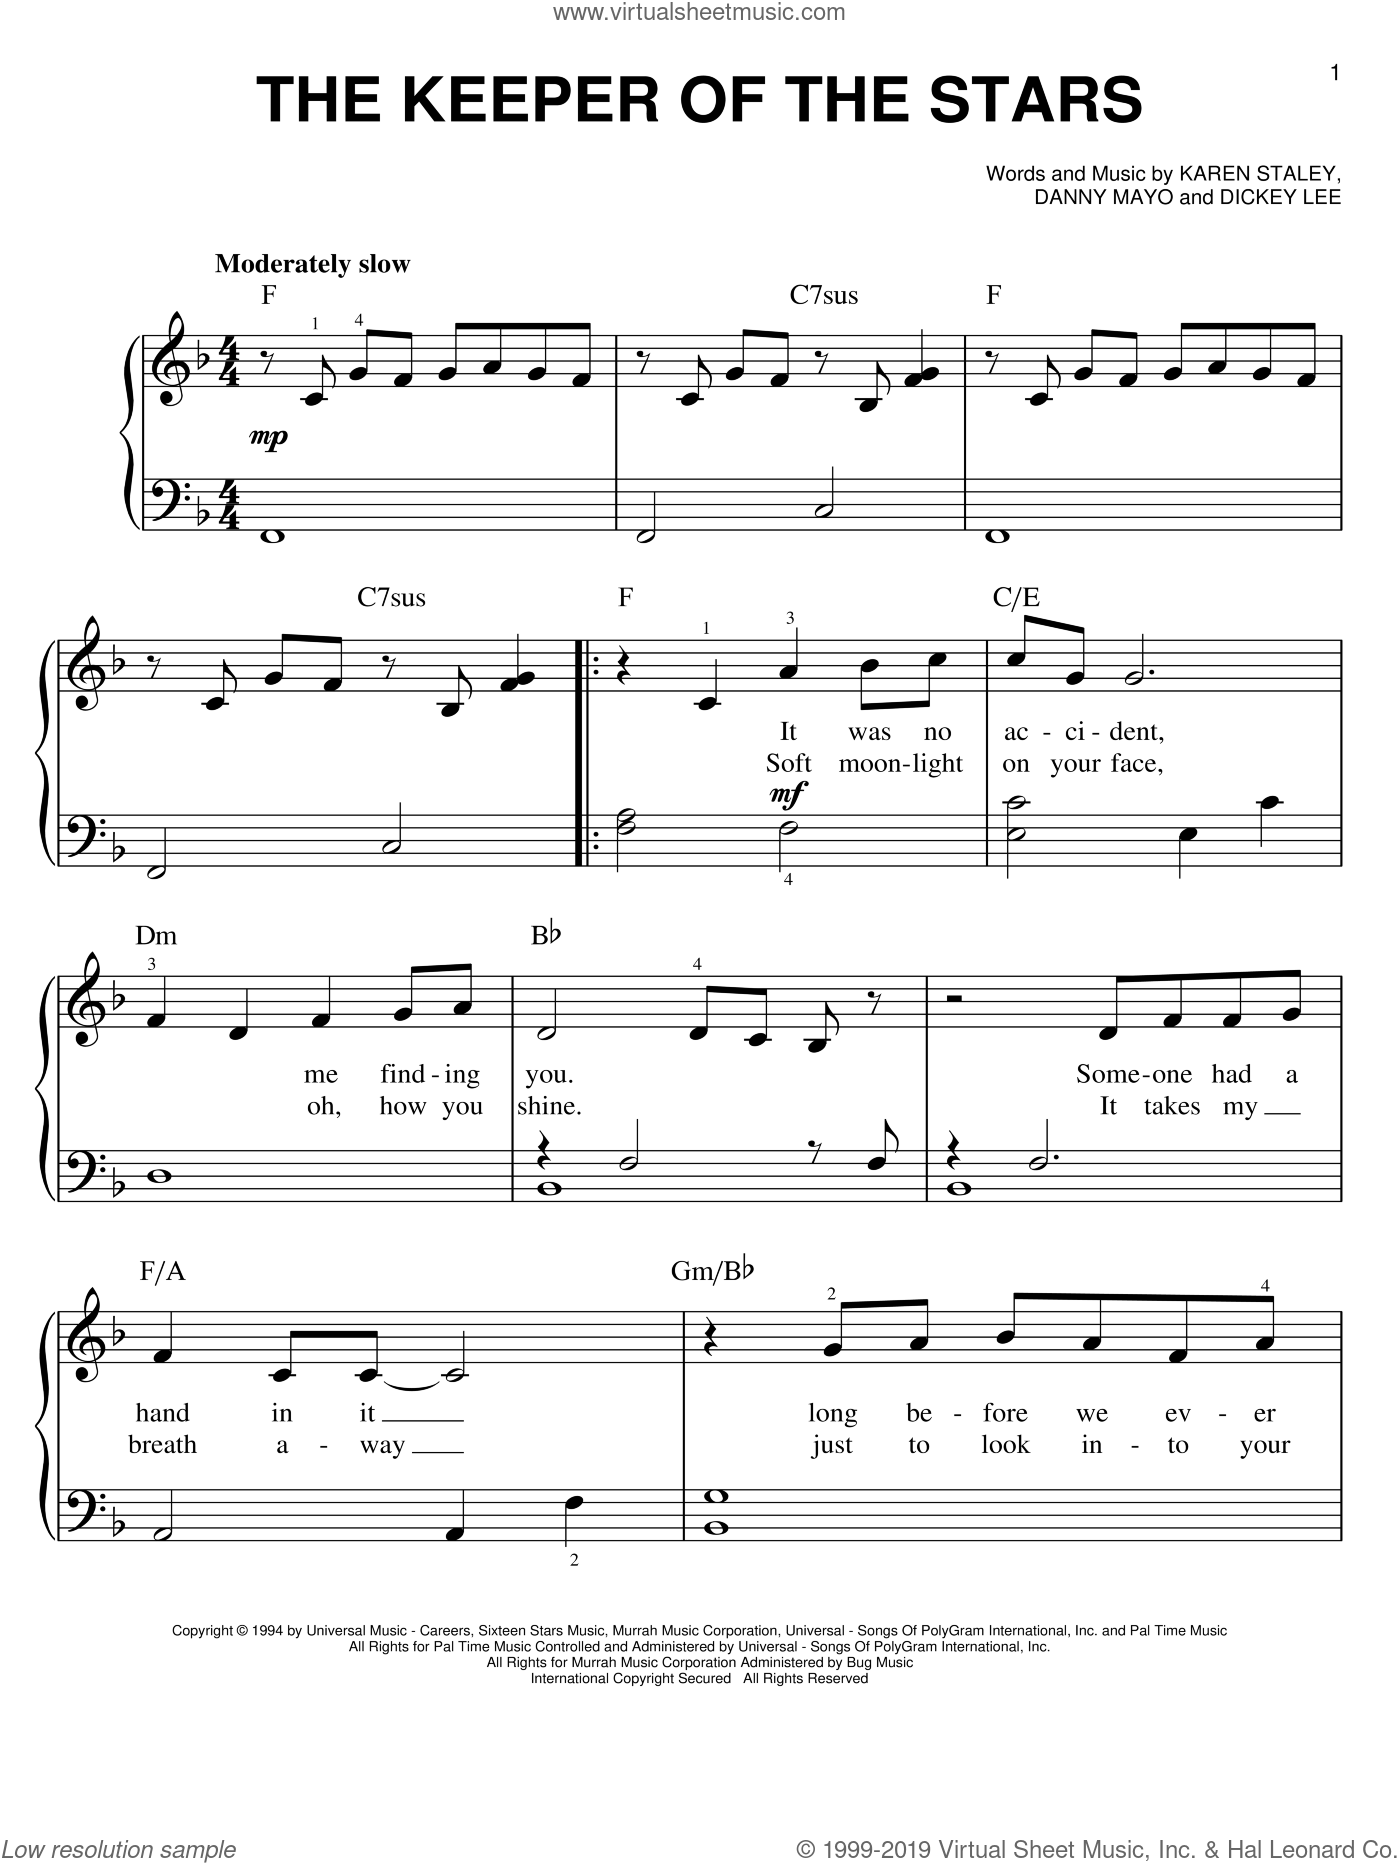 The Keeper Of The Stars sheet music for piano solo (PDF)